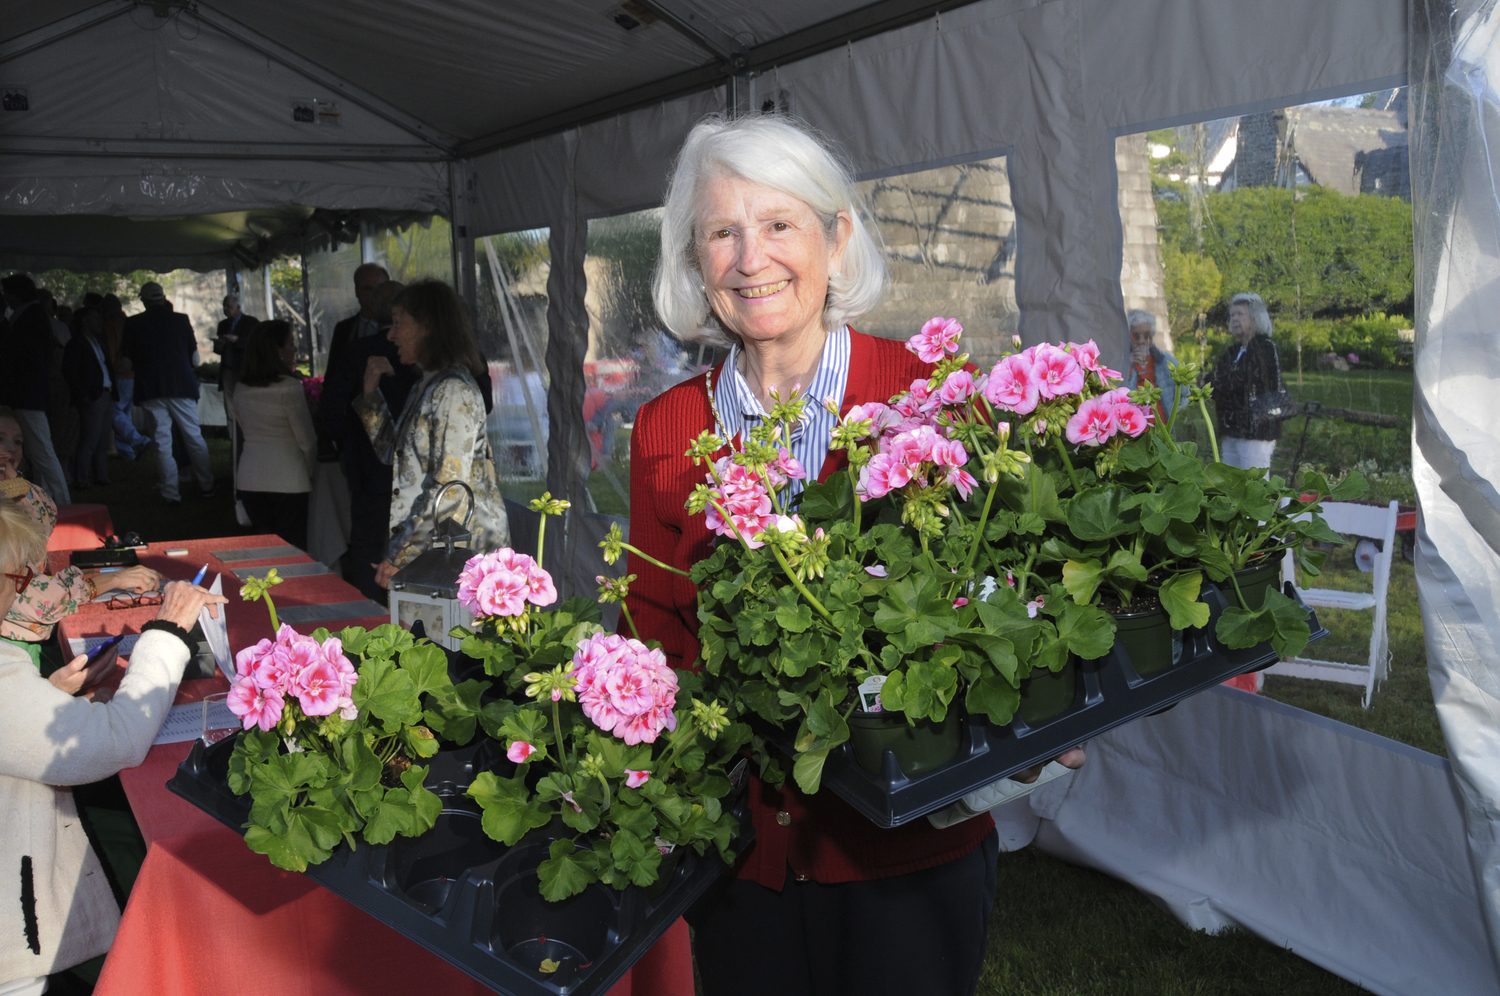 Lalitte Smith at the Garden Club of East Hampton's annual garden party and plant sale on the grounds of Mulford Farm in East Hampton on Friday evening. Plant lovers took home armloads and Flexible Flyers full of their favorites and bid for silent auction items. A special 